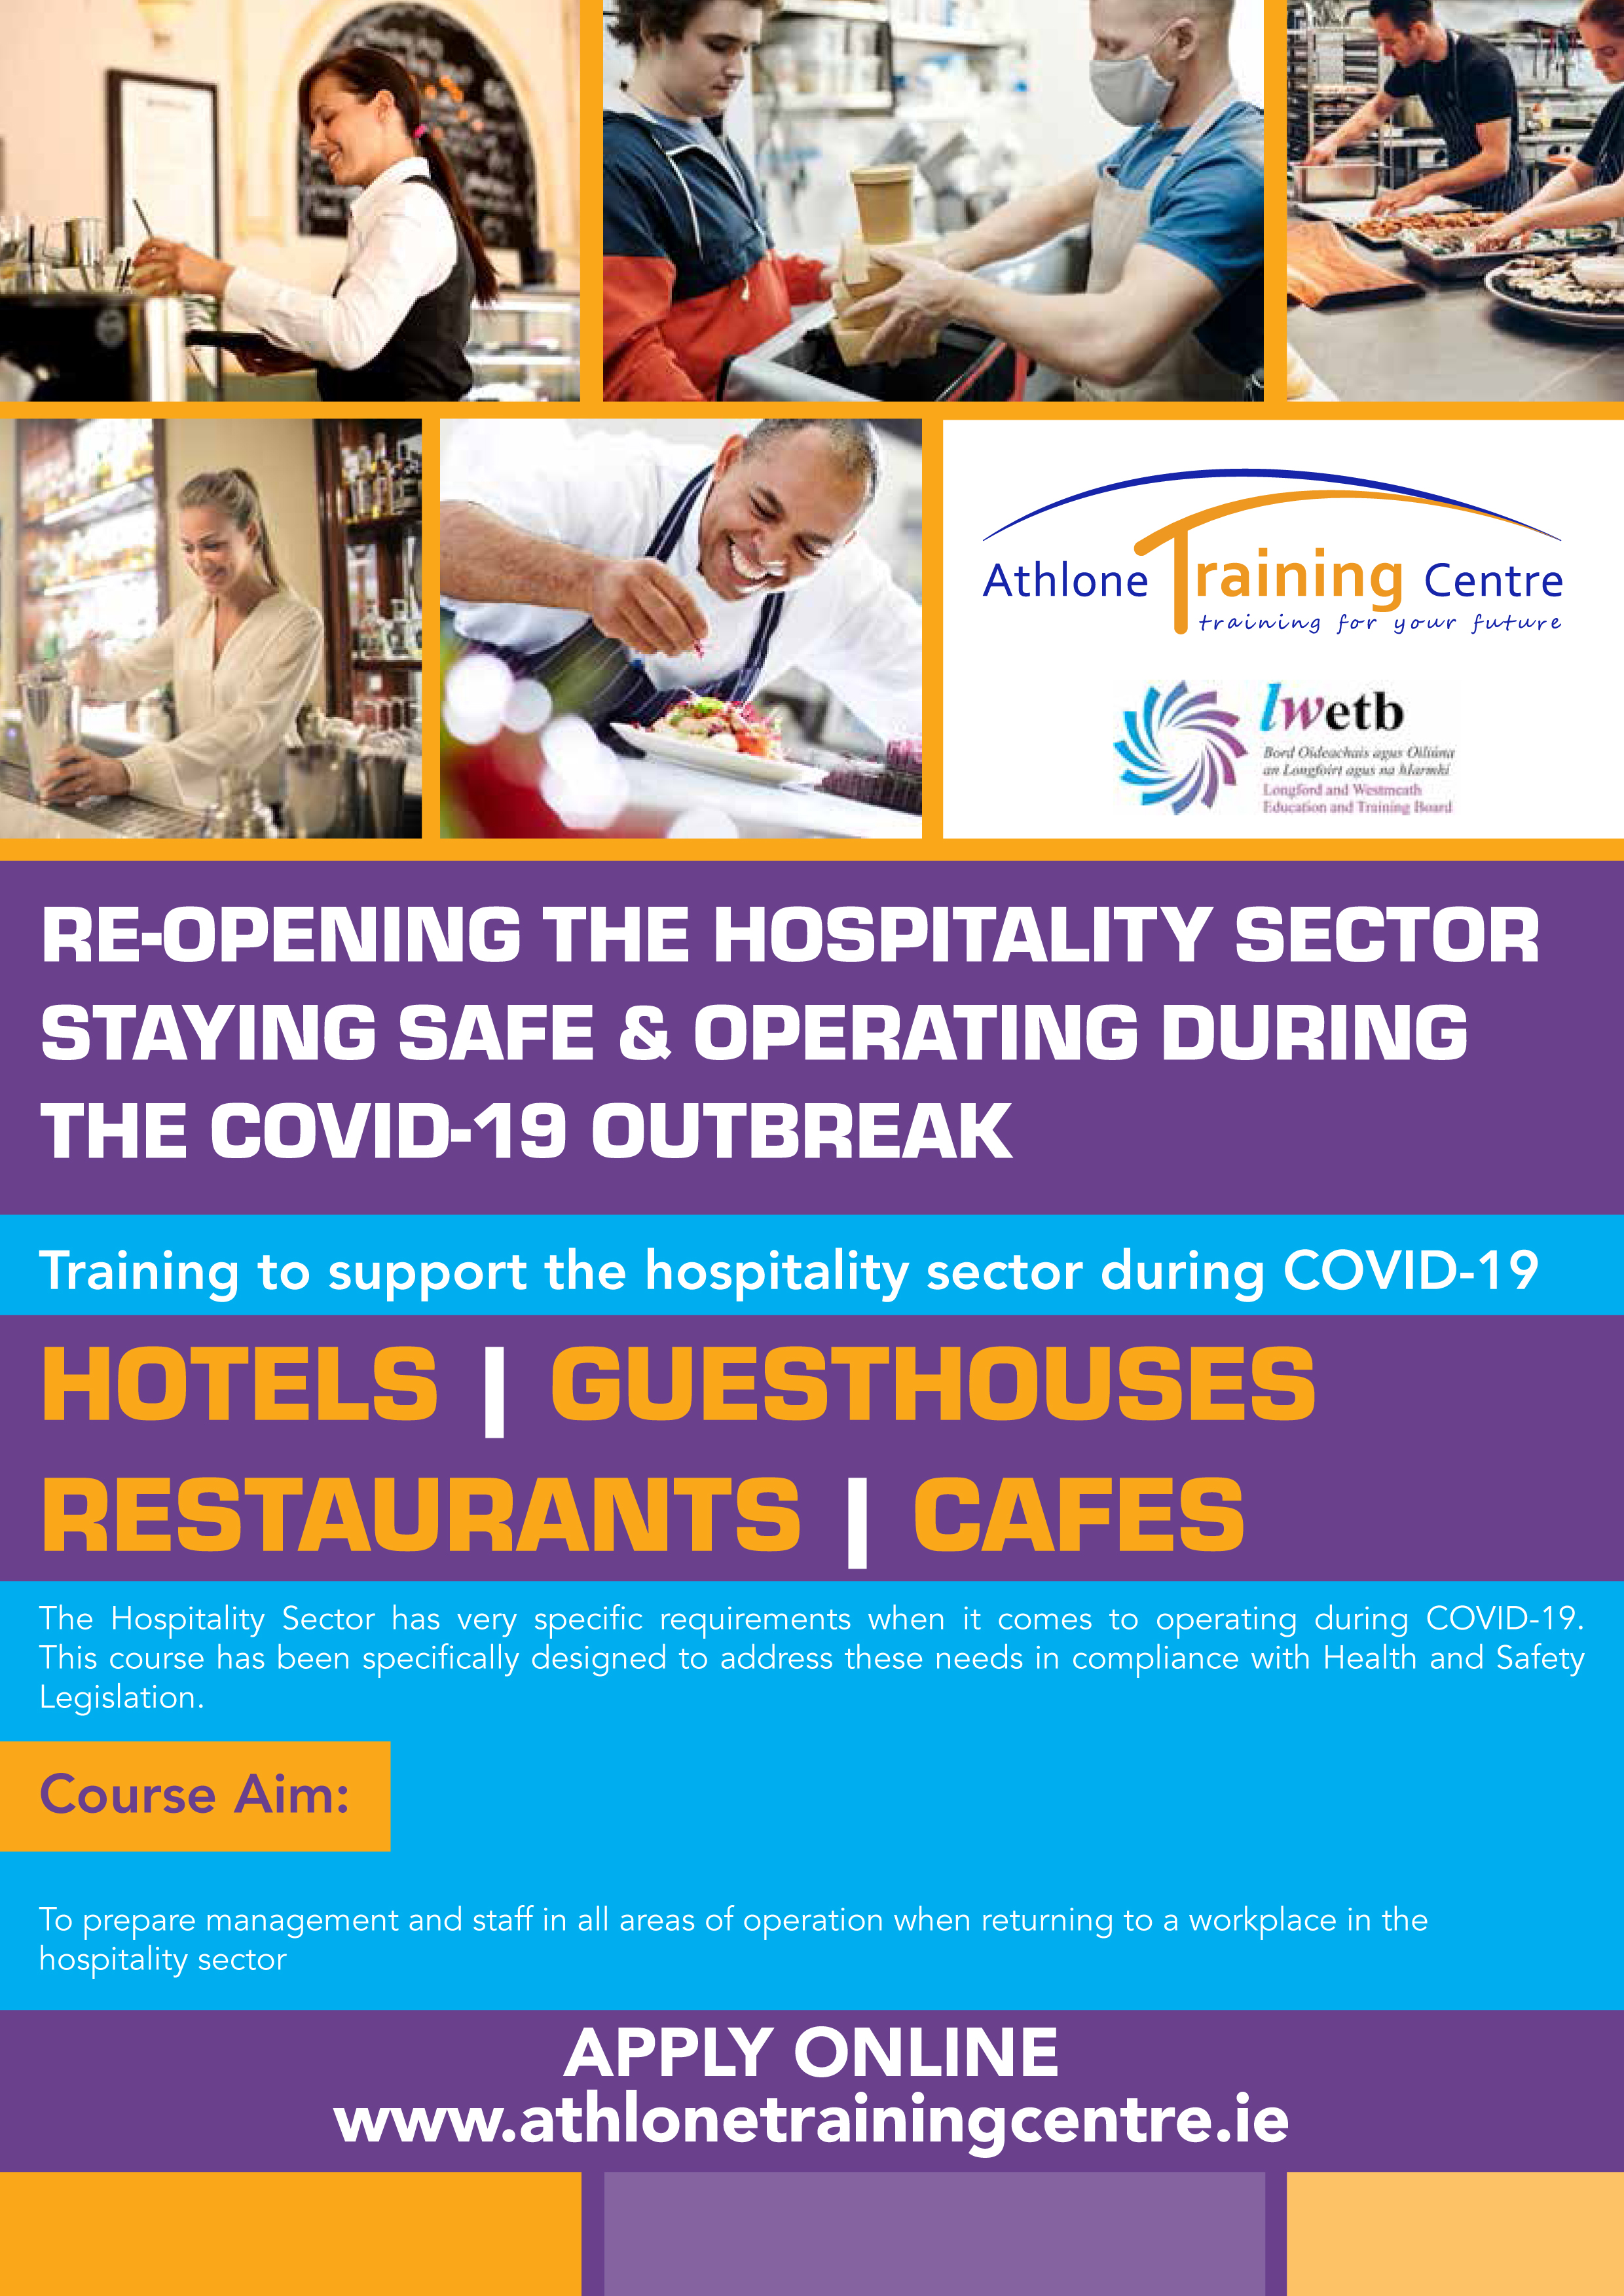 ovid-19 - Hospitality Sector - Safely Returning to workplaces